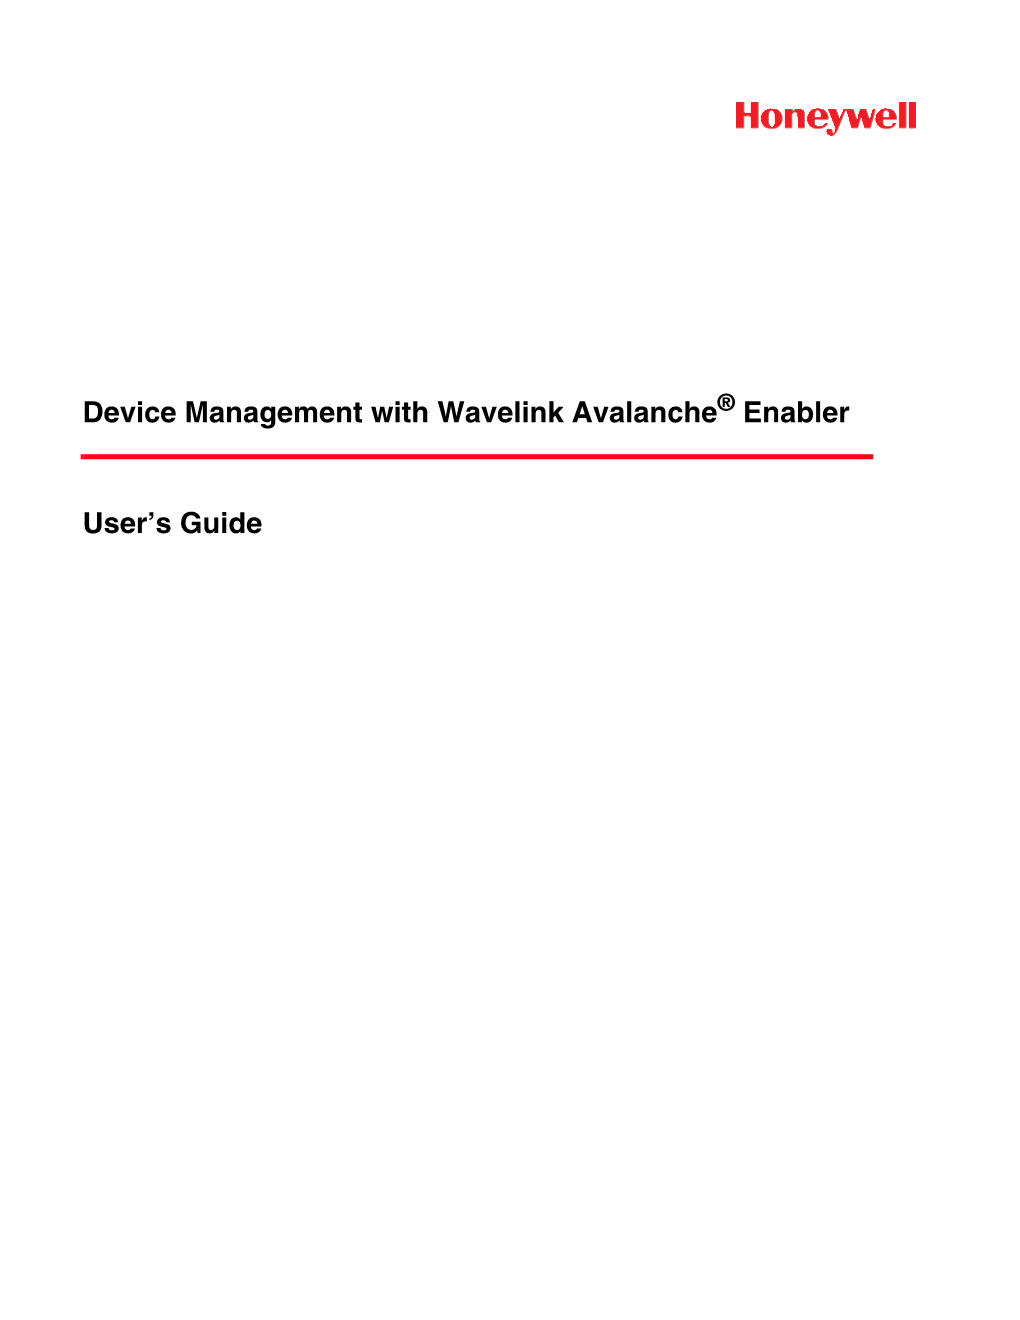 Device Management with Wavelink Avalanche Enabler User's Guide